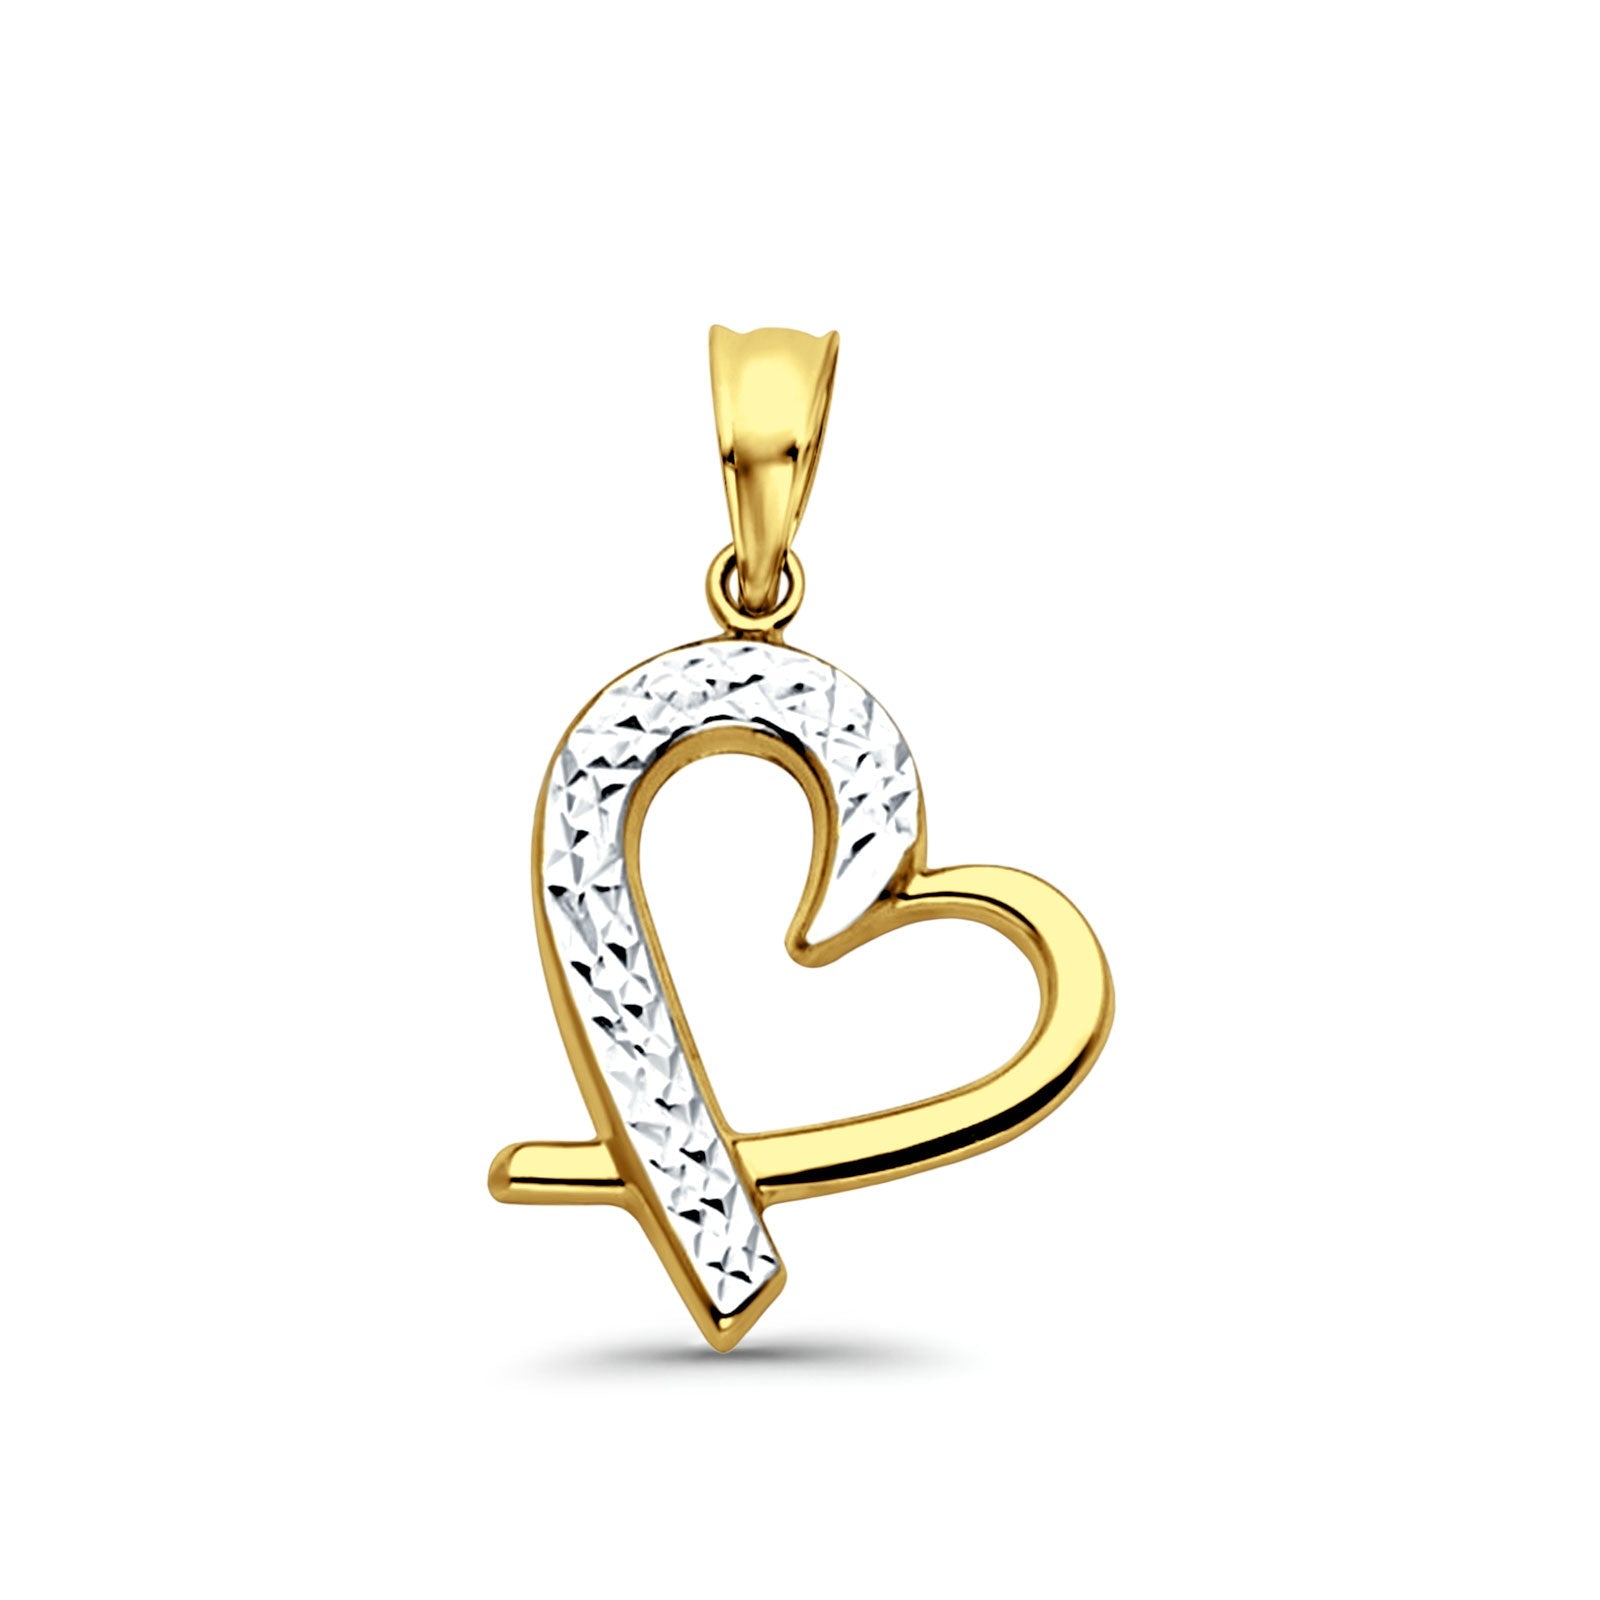 14K Two Color Gold Heart Pendant 23mmX15mm With 16 Inch To 24 Inch 1.0MM Width D.C. Round Wheat Chain Necklace